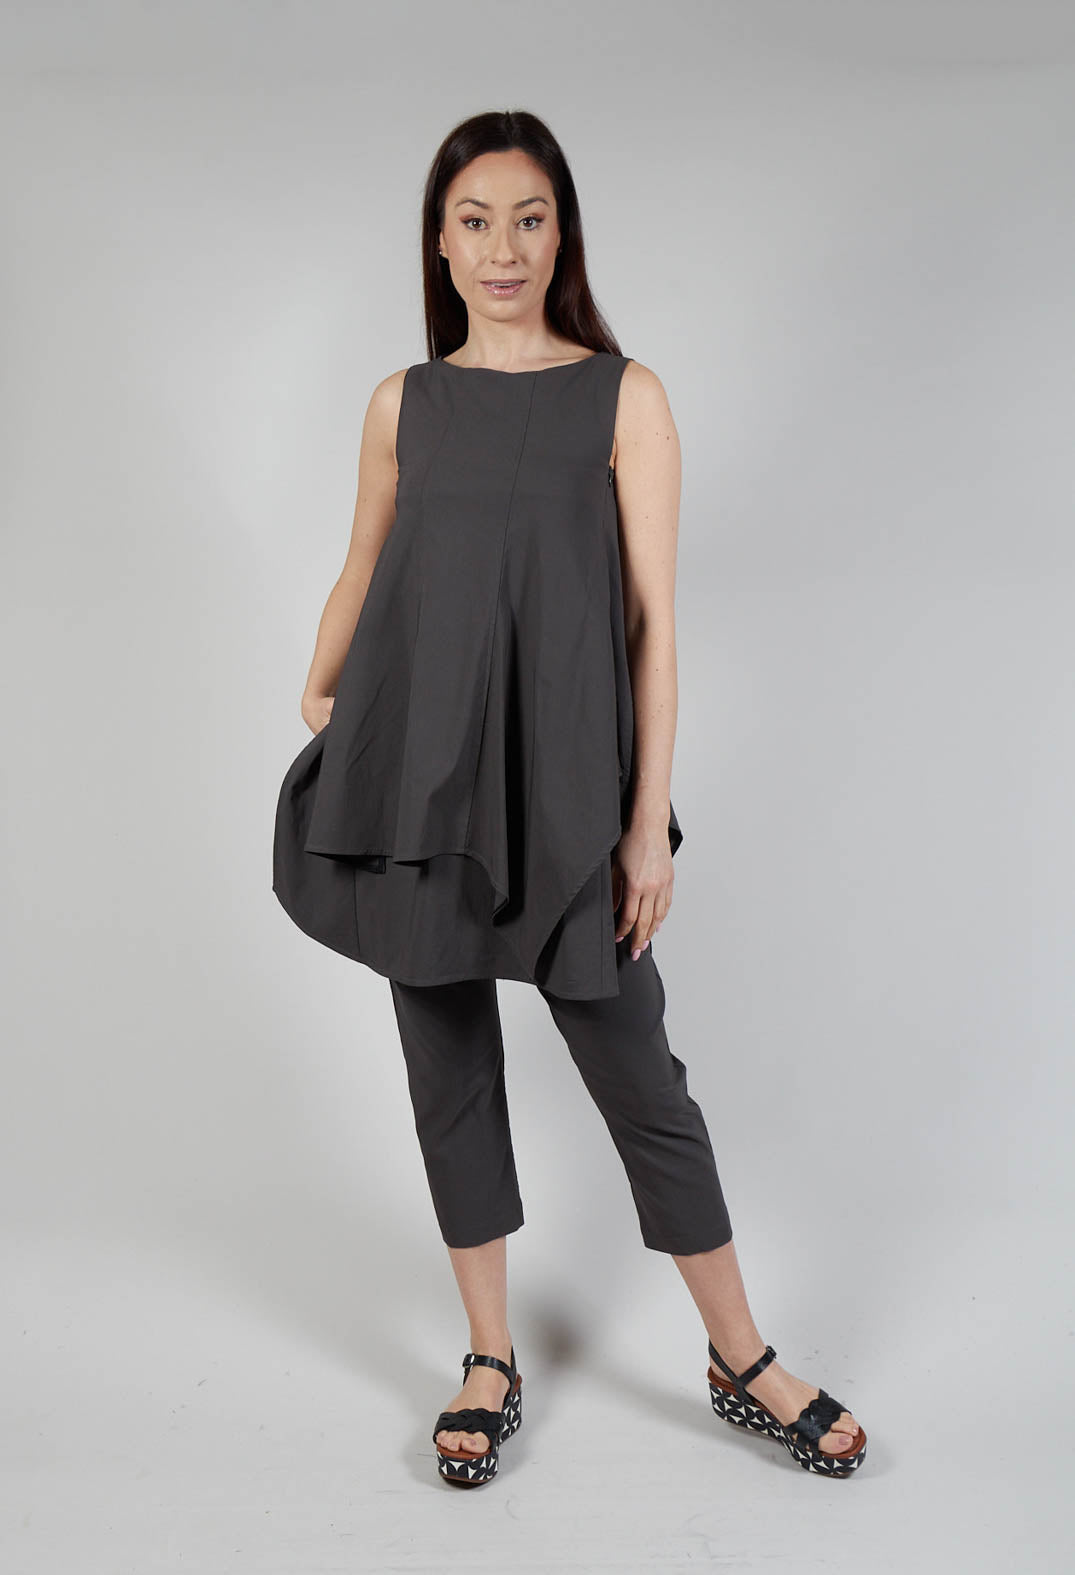 Pulp Fiction Tunic Top in Carbone